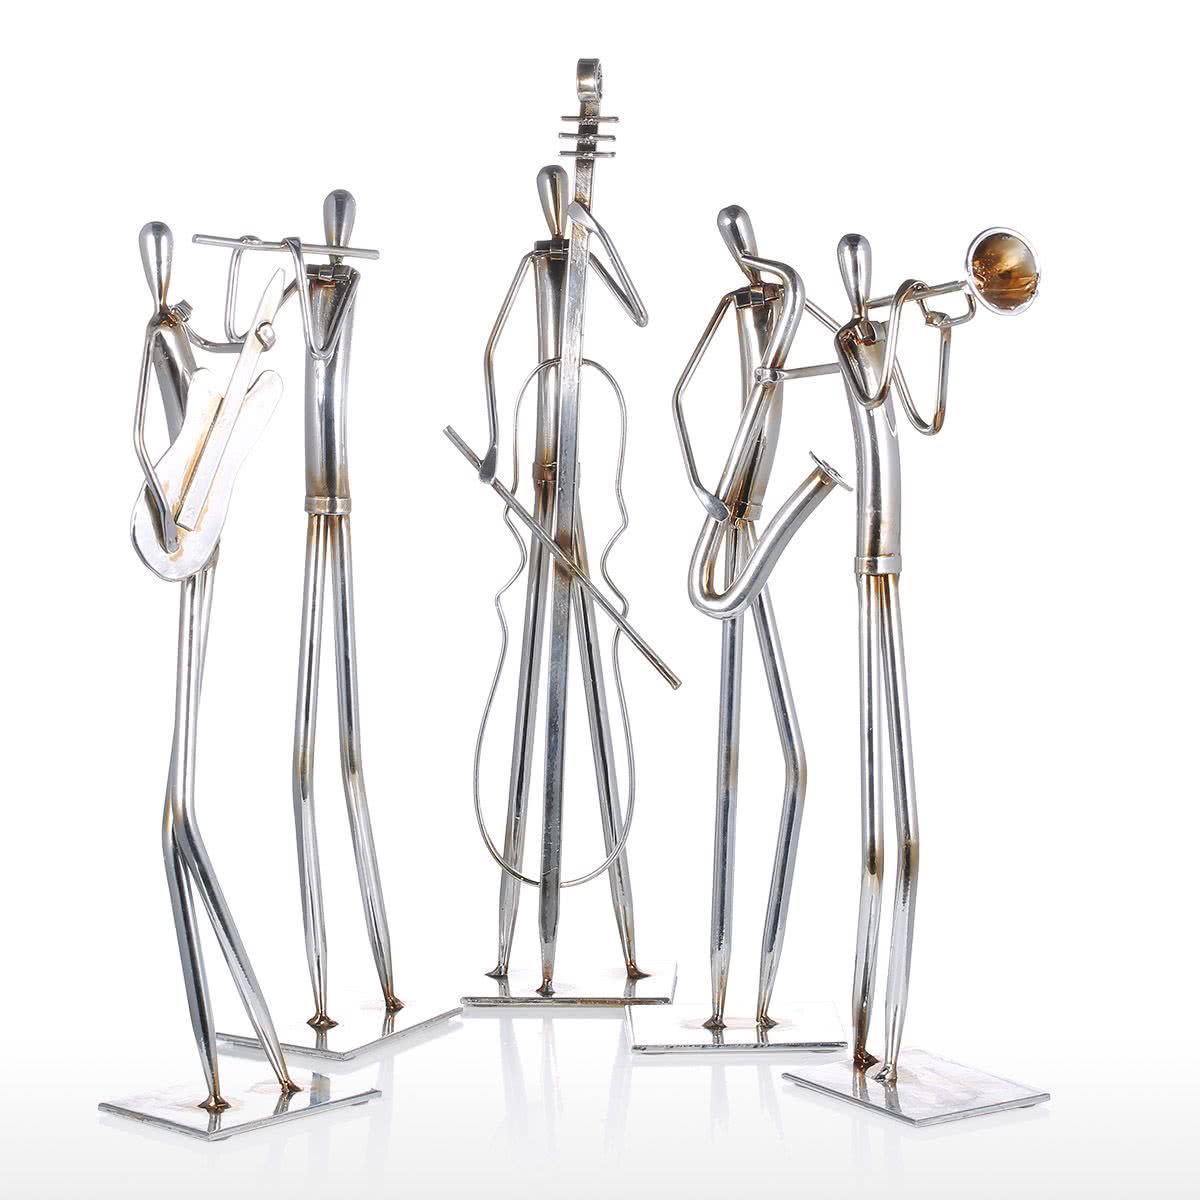 Cello, Guitar, Flute, Trumpet, Saxophone with Musician and Symphony Orchestra Metal Sculpture